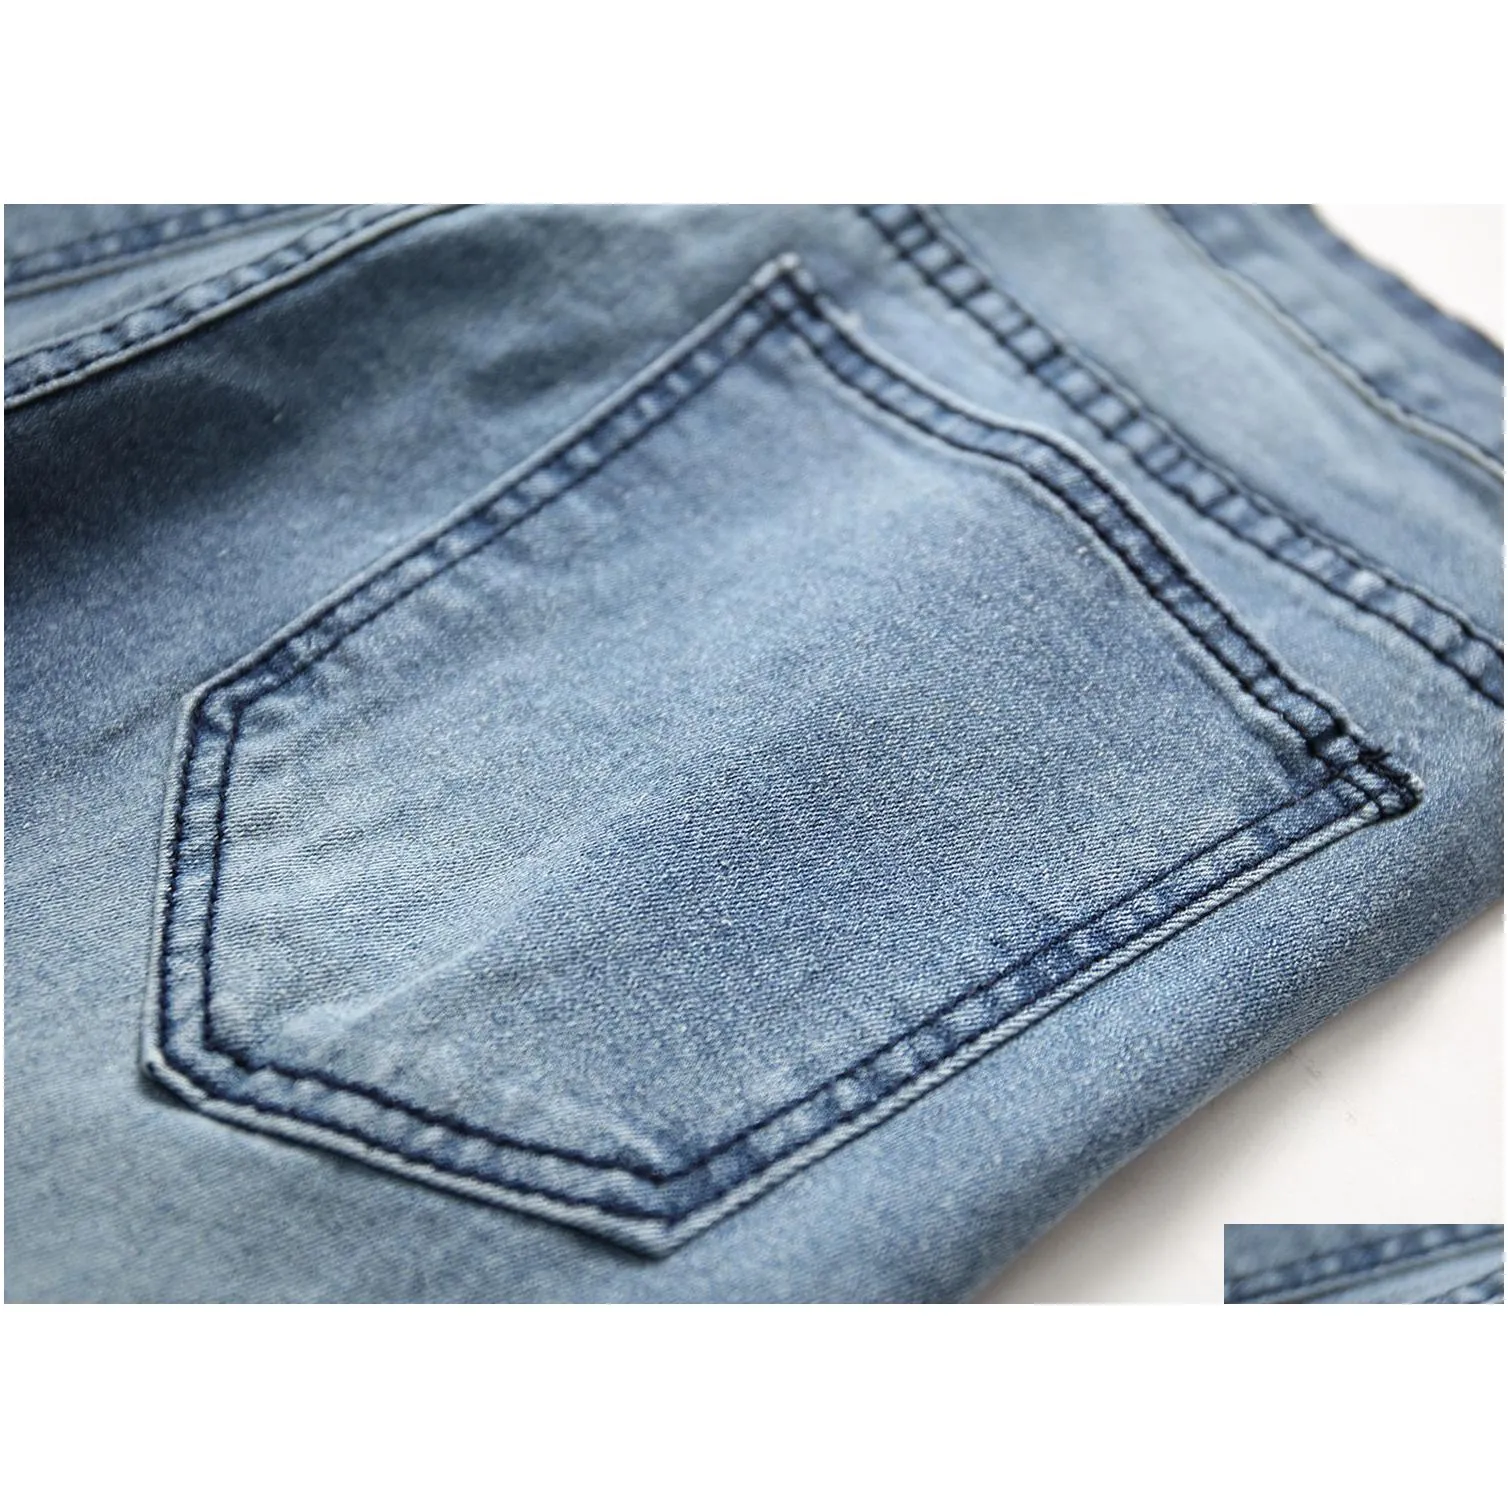 Men`S Jeans Men Biker Hole Ripped Light Blue Color Bunch Of Foot Slim Fit All Season Casual Style Skinny Drop Delivery Apparel Clothi Dhj25